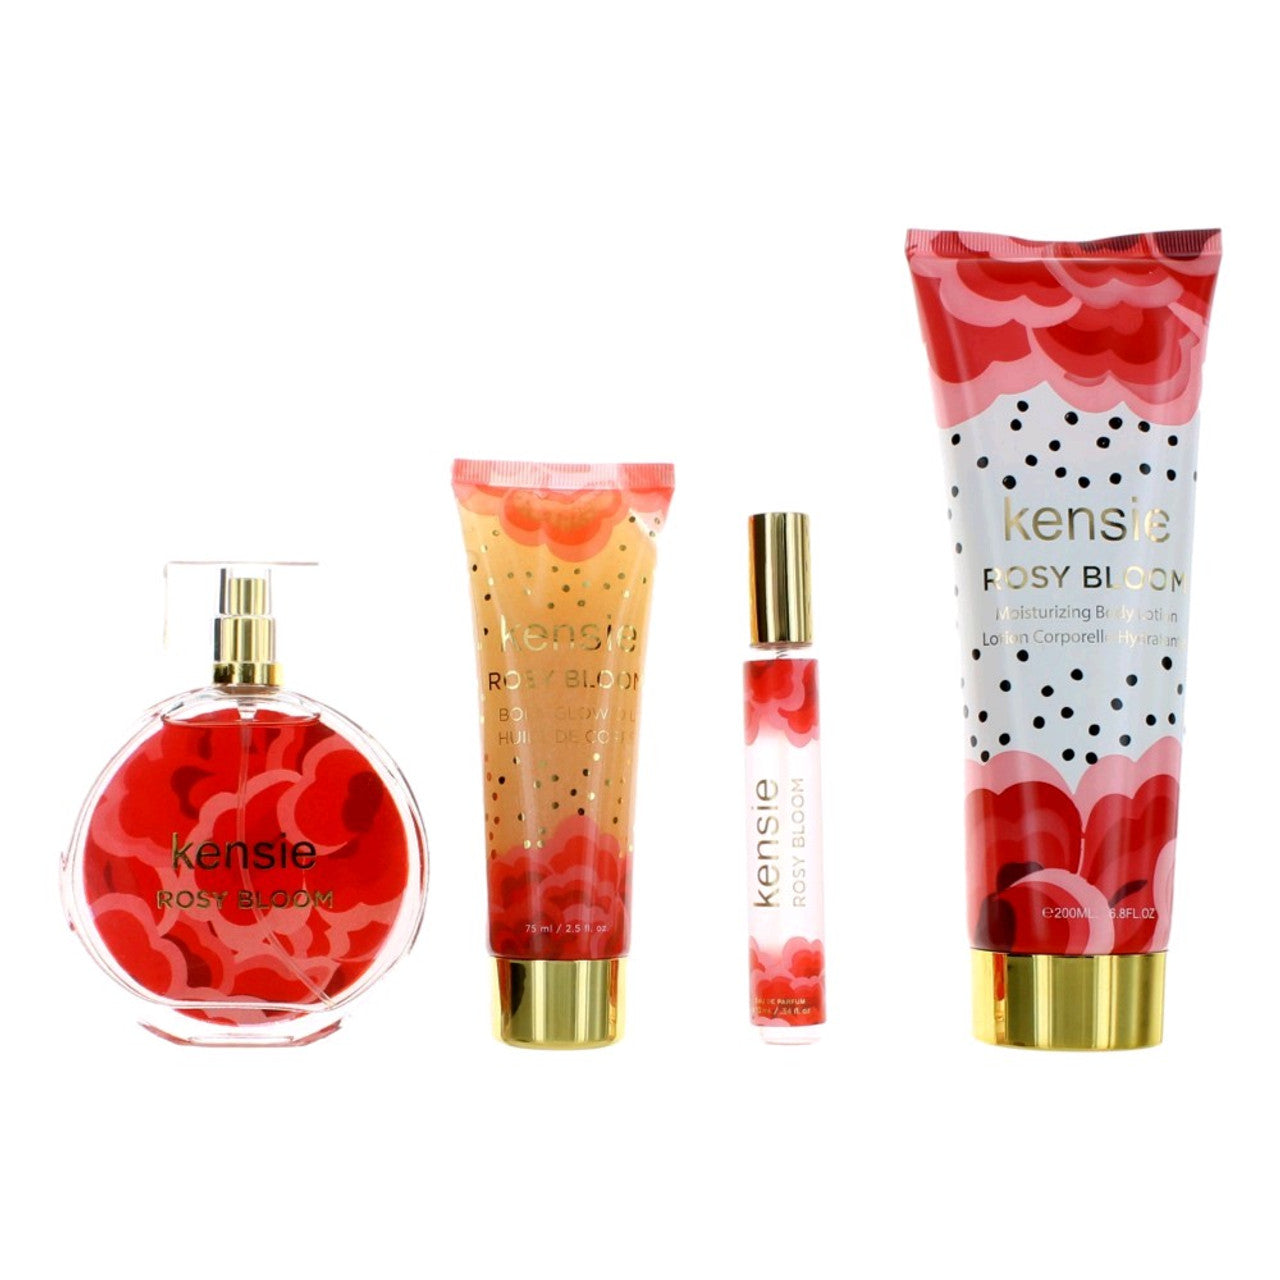 4 Piece Gift Set from Kensie Rosy Bloom collection